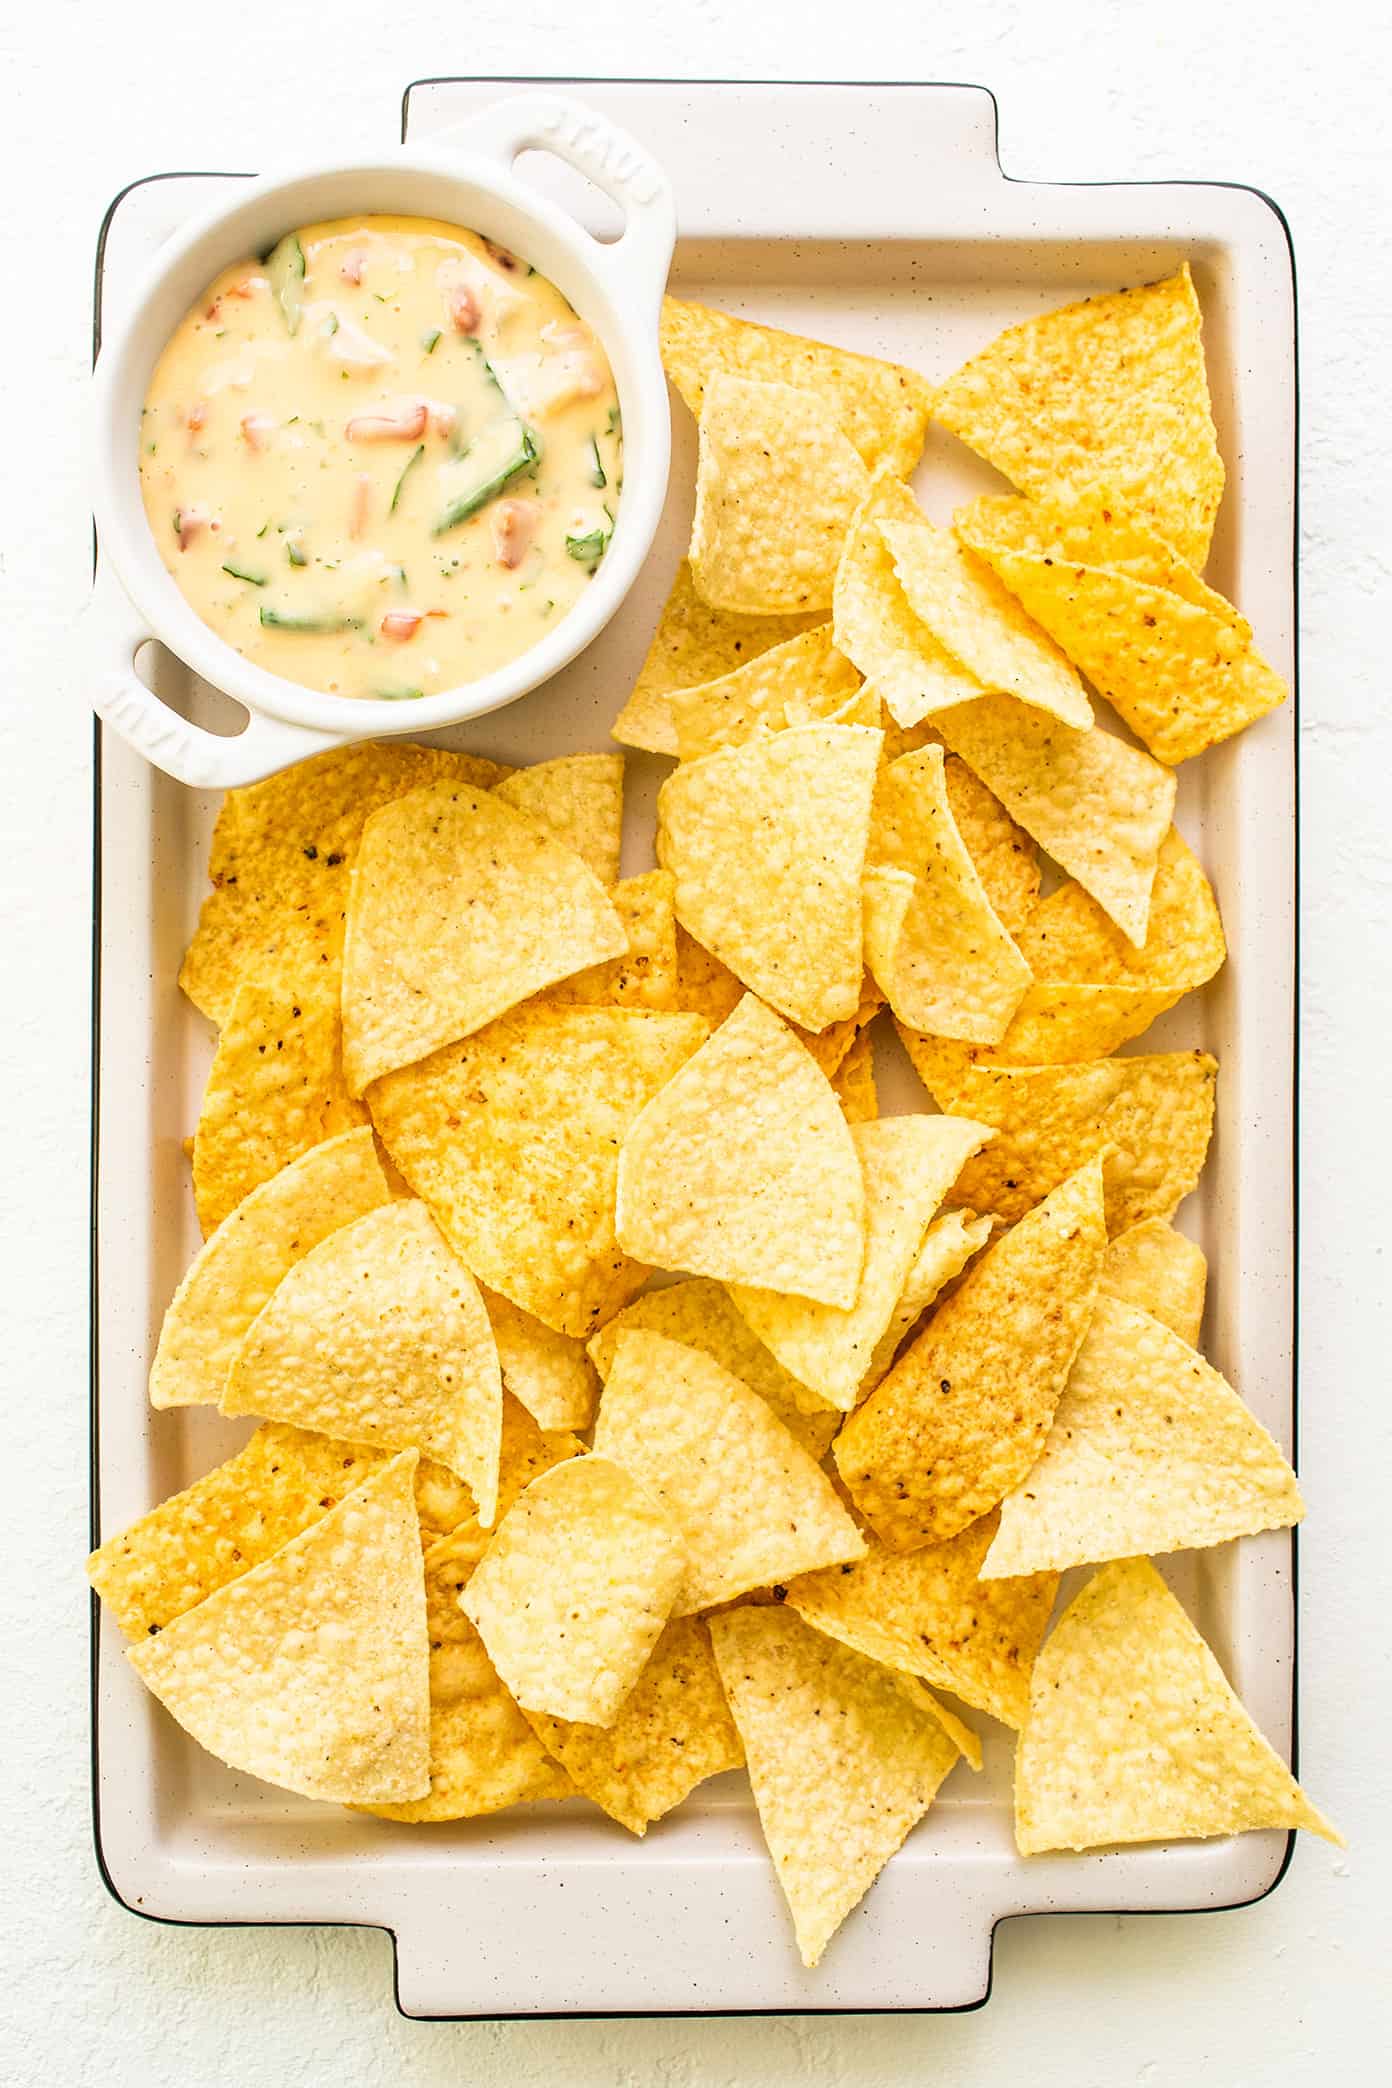 Chips and Queso Blanco on Sheet Pan